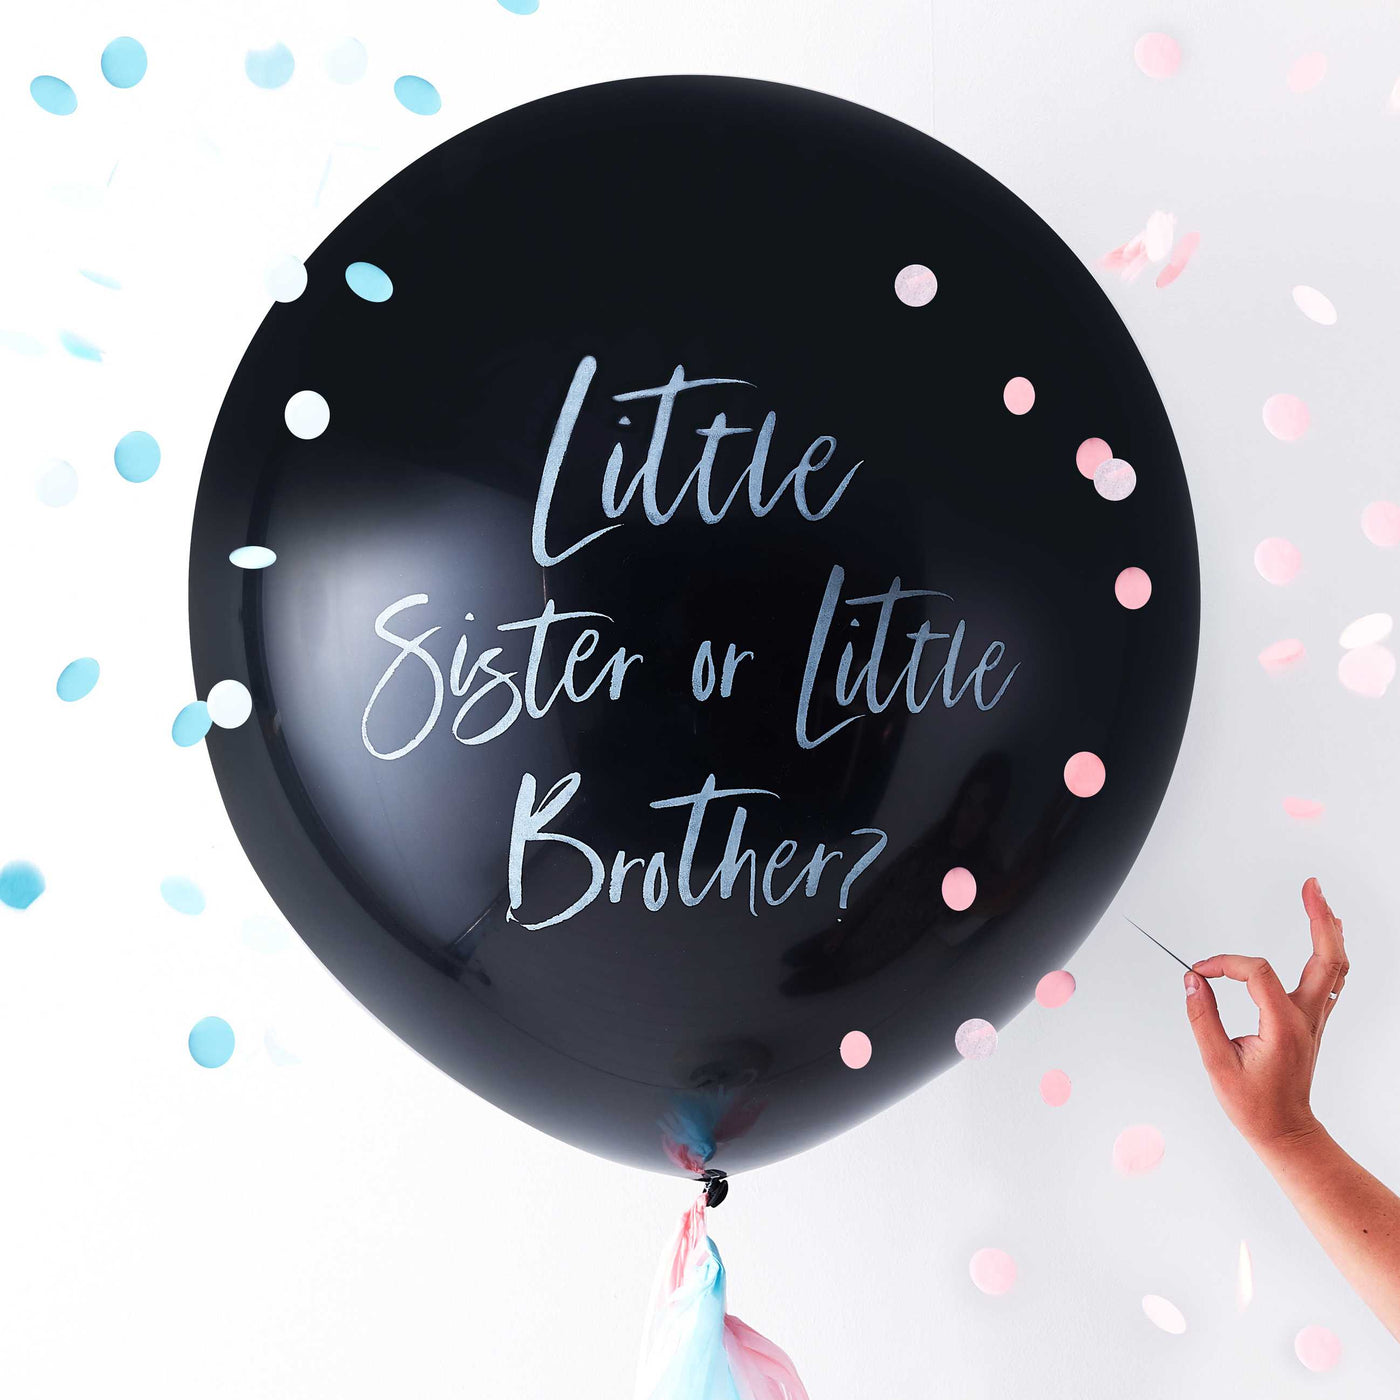 XL balloon Little sister or little brother? with confetti